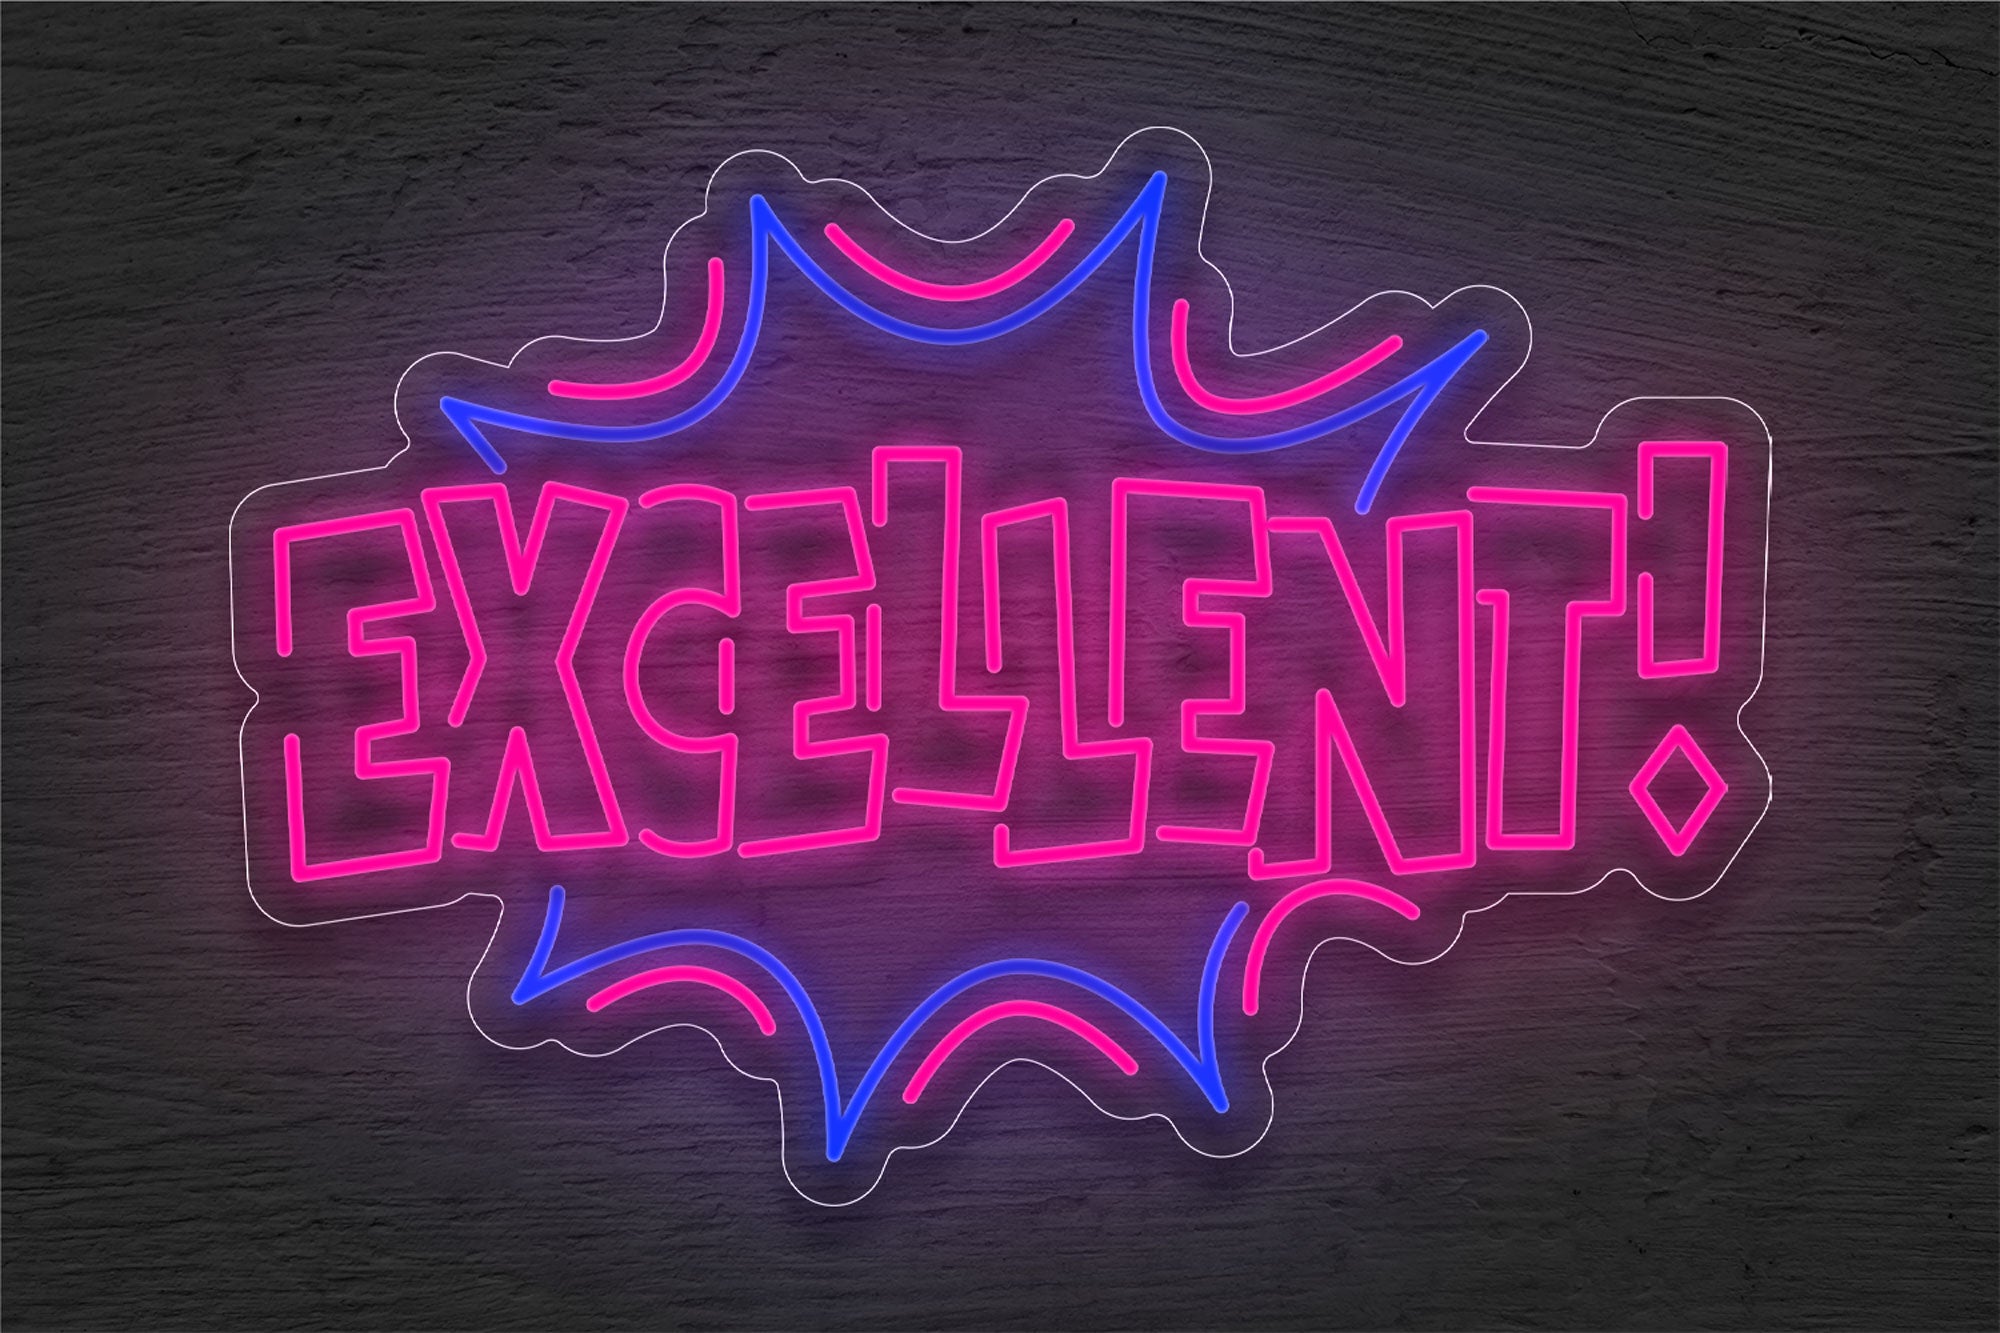 "Excellent!" with Border LED Neon Sign